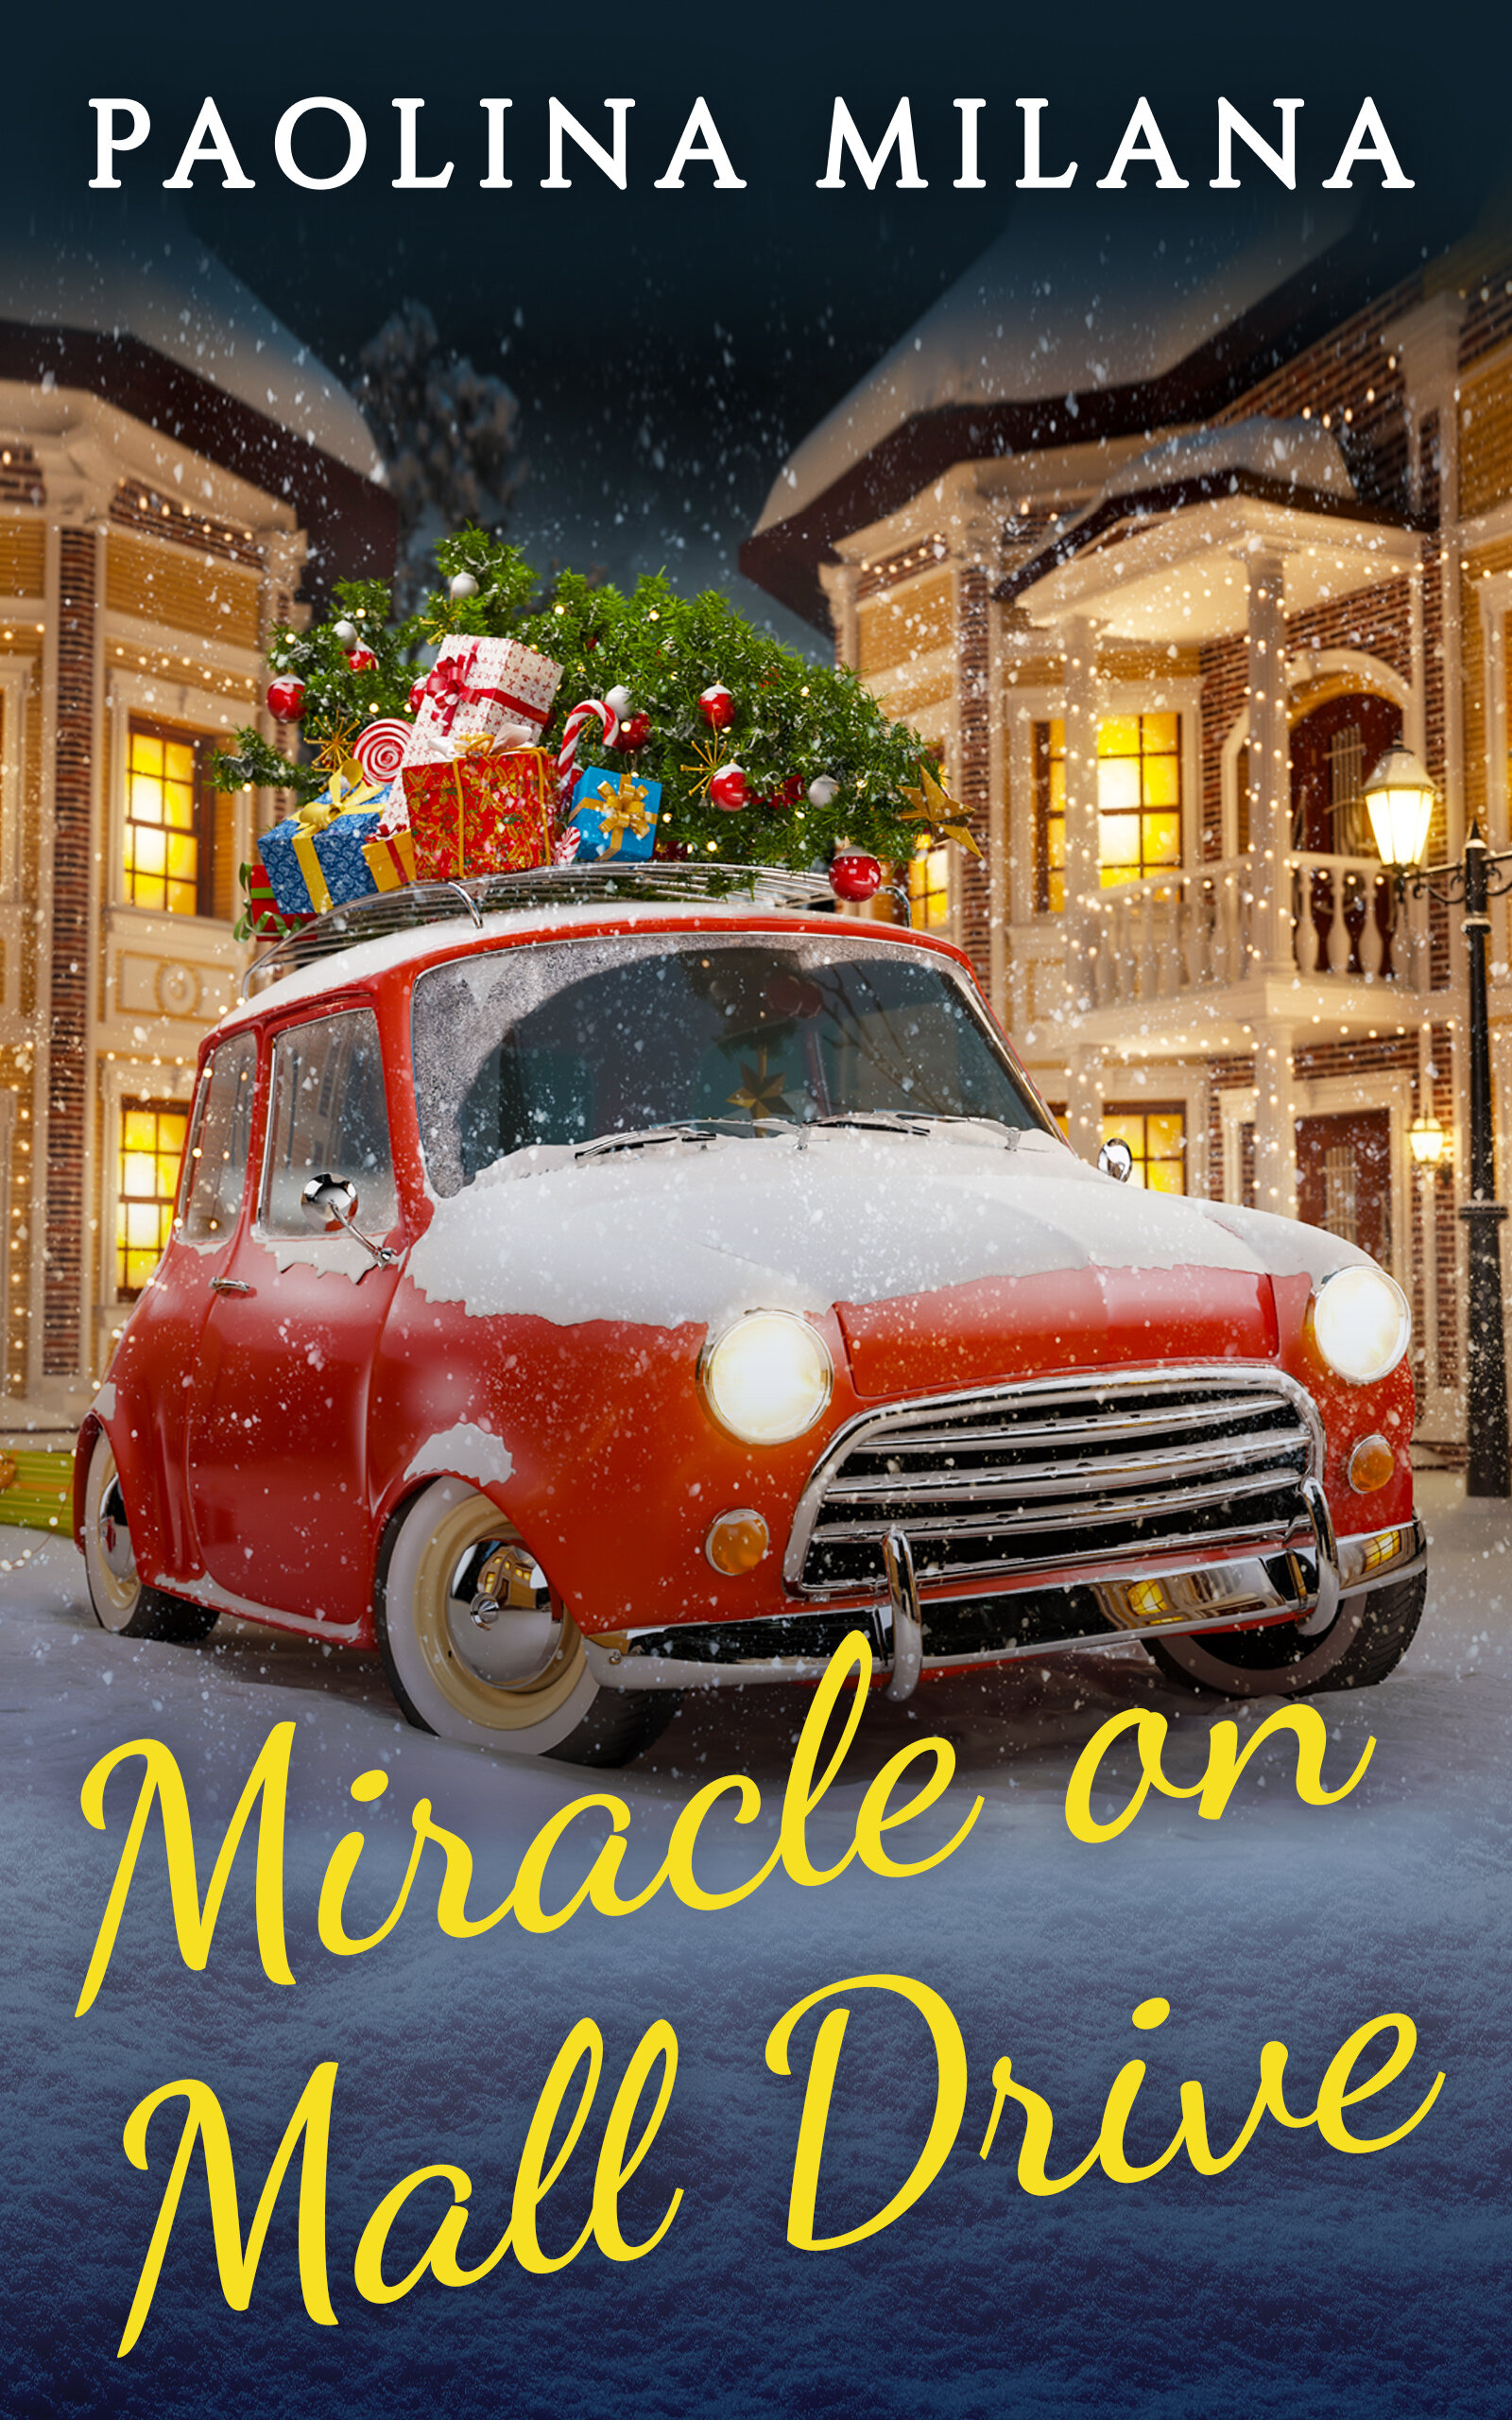 FINAL Miracle on Mall Drive book cover Nov MIRACLE2 (1).jpg